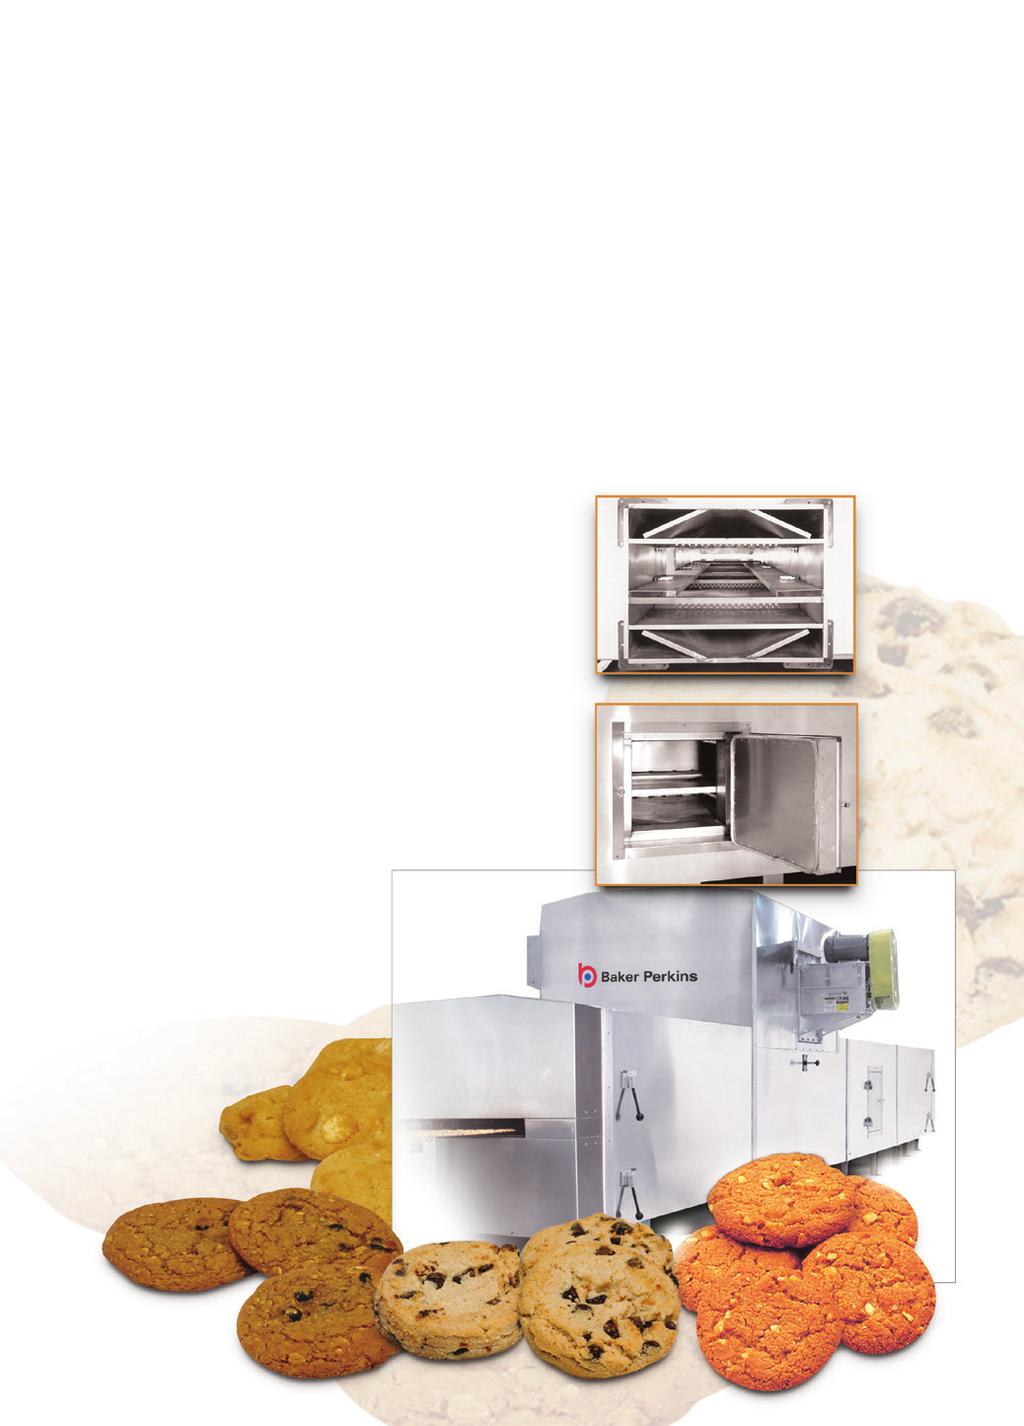 EM Recirc Oven Cookies, brownies, cup cakes This is North America s preferred oven for a broad product range.